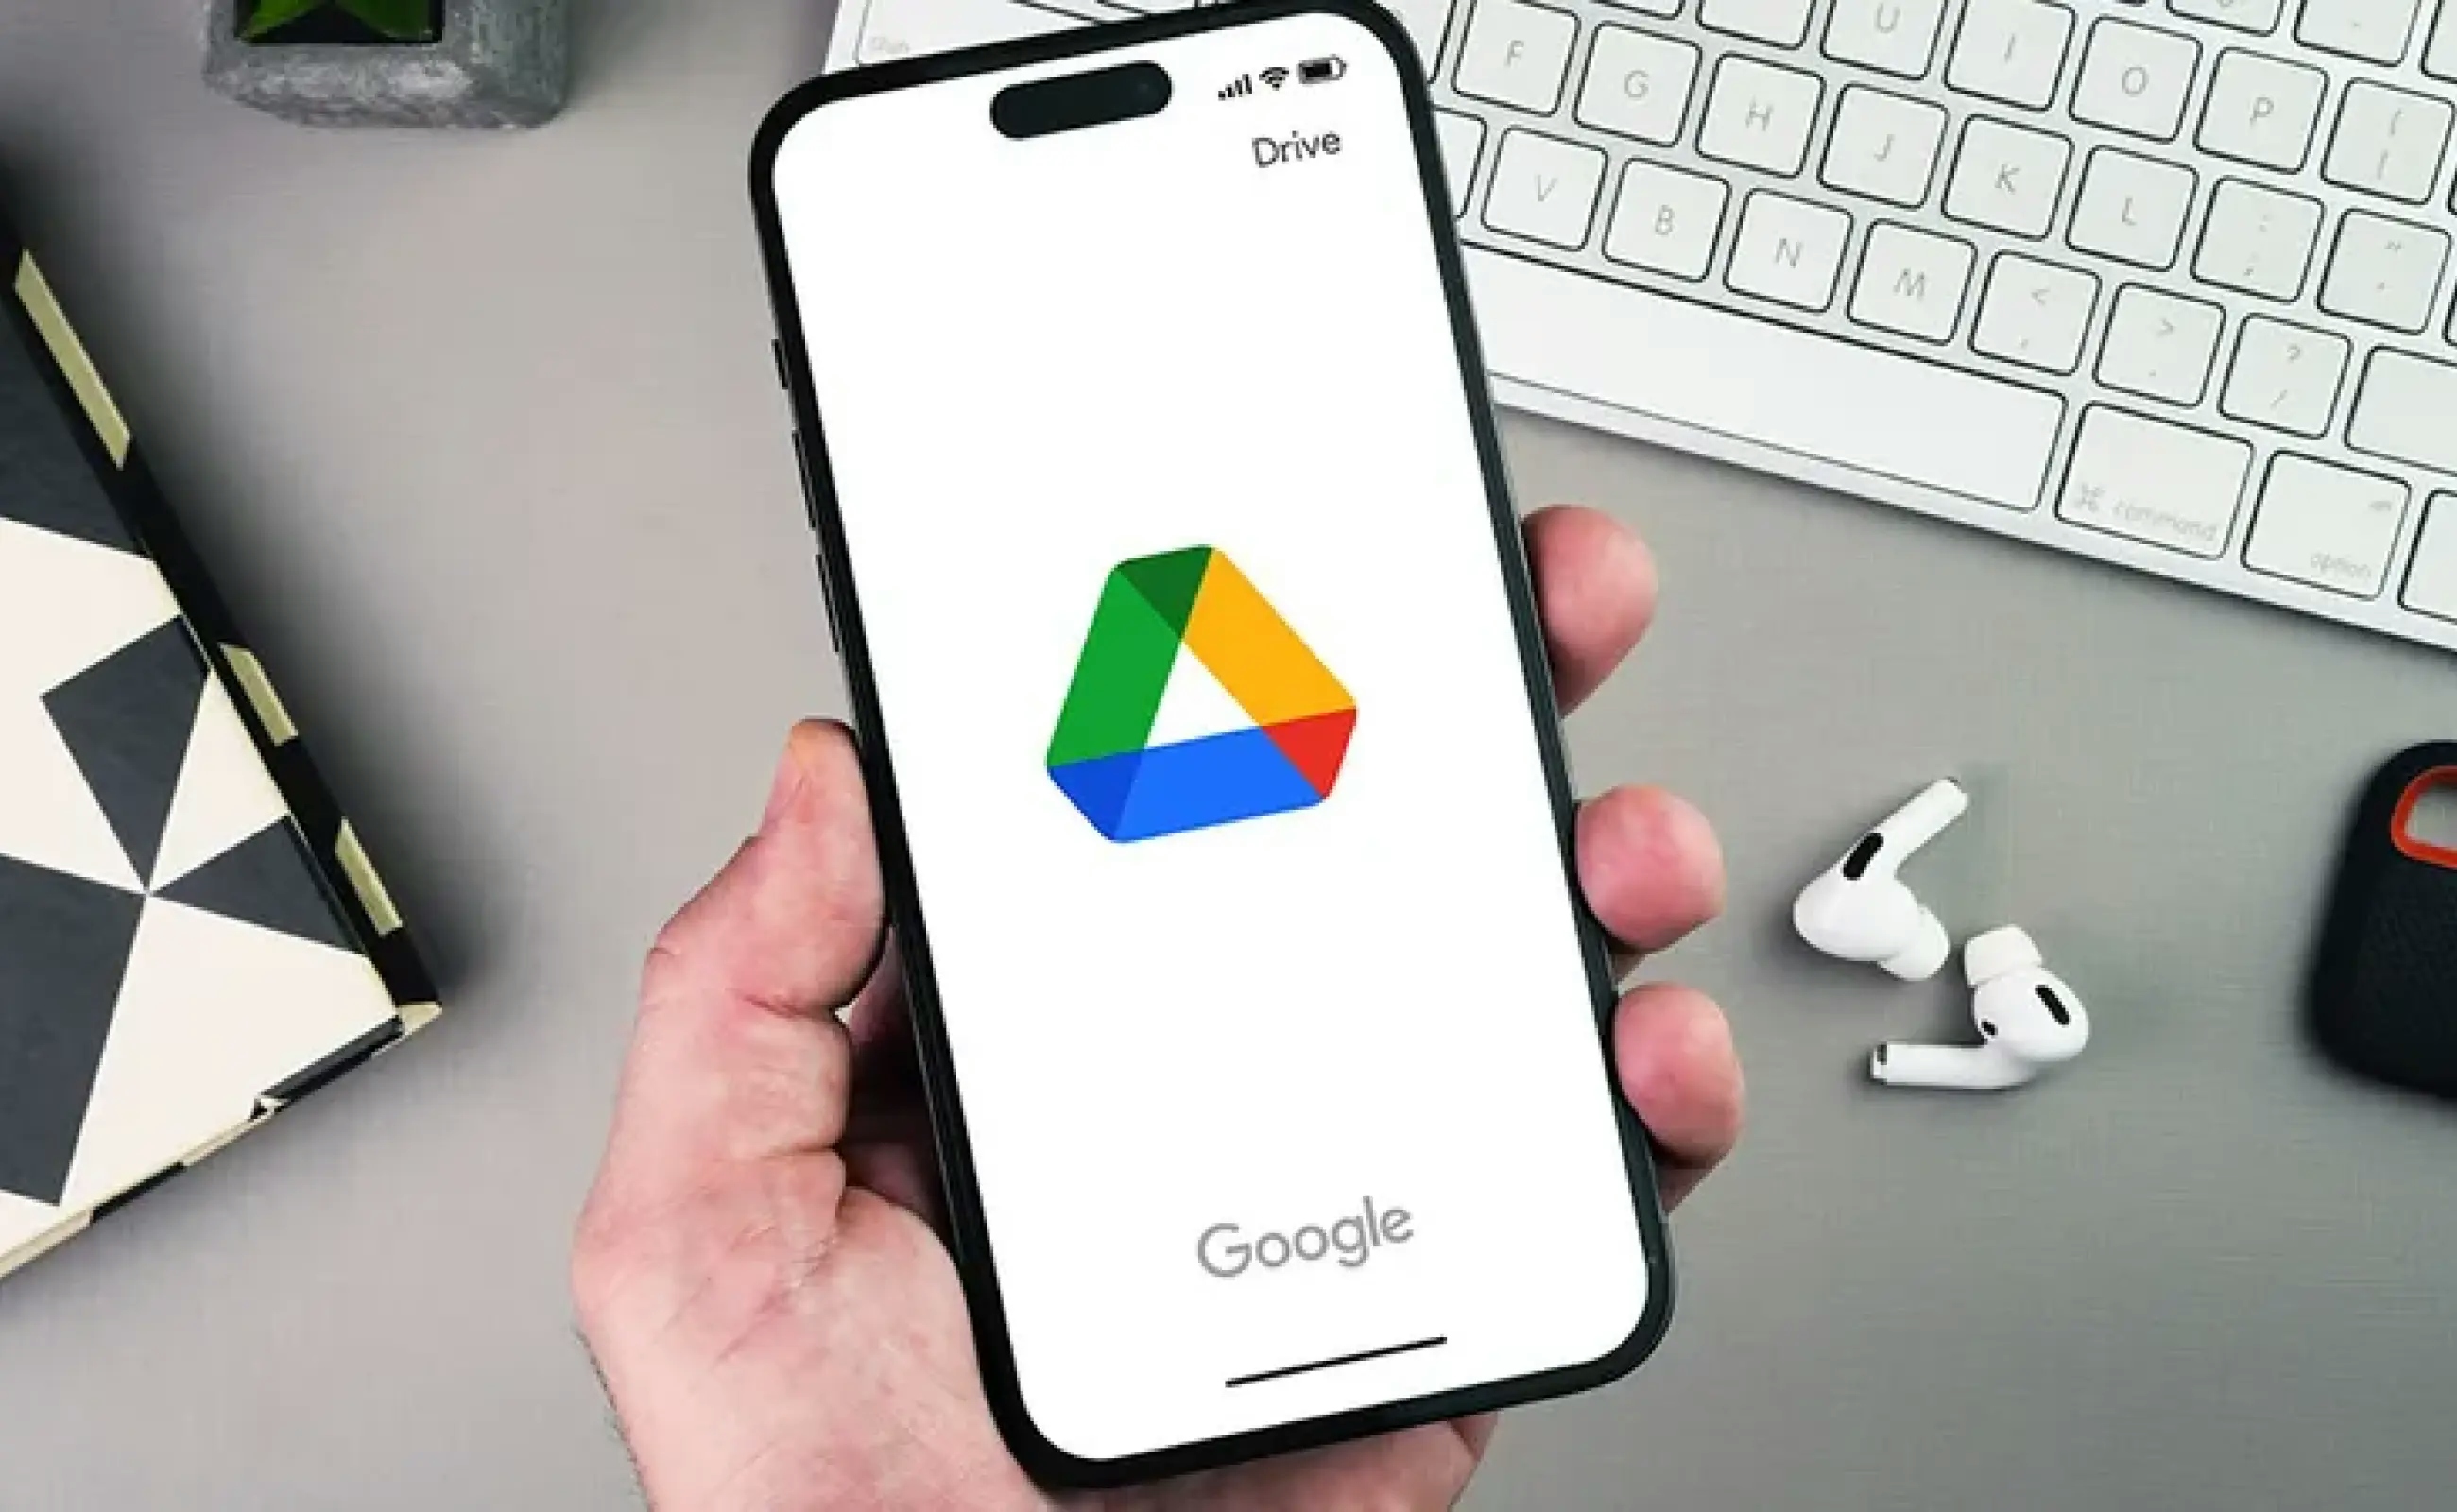 Google Drive on an iPhone being held